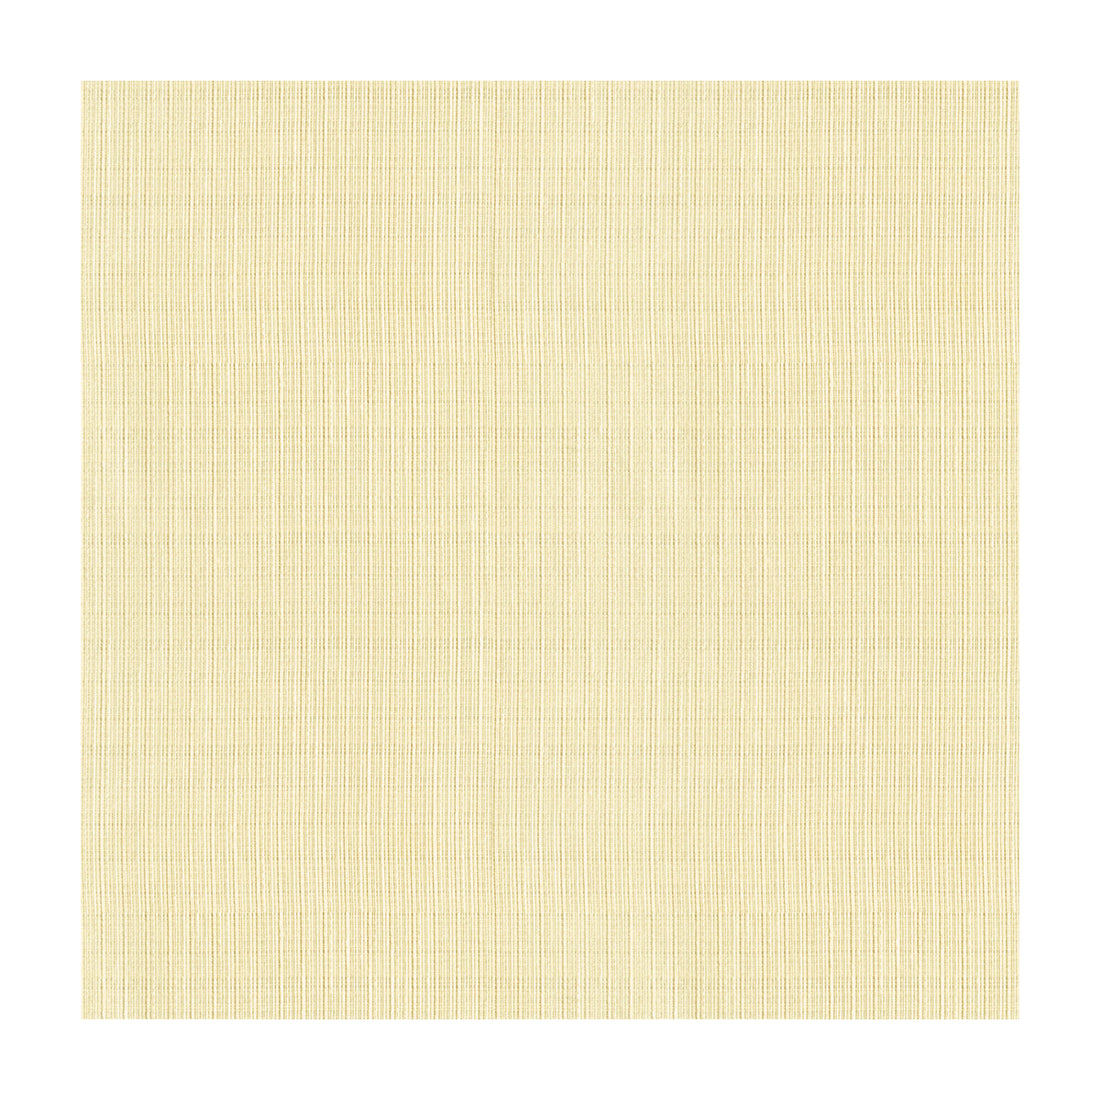 Kravet Contract fabric in 4158-1 color - pattern 4158.1.0 - by Kravet Contract